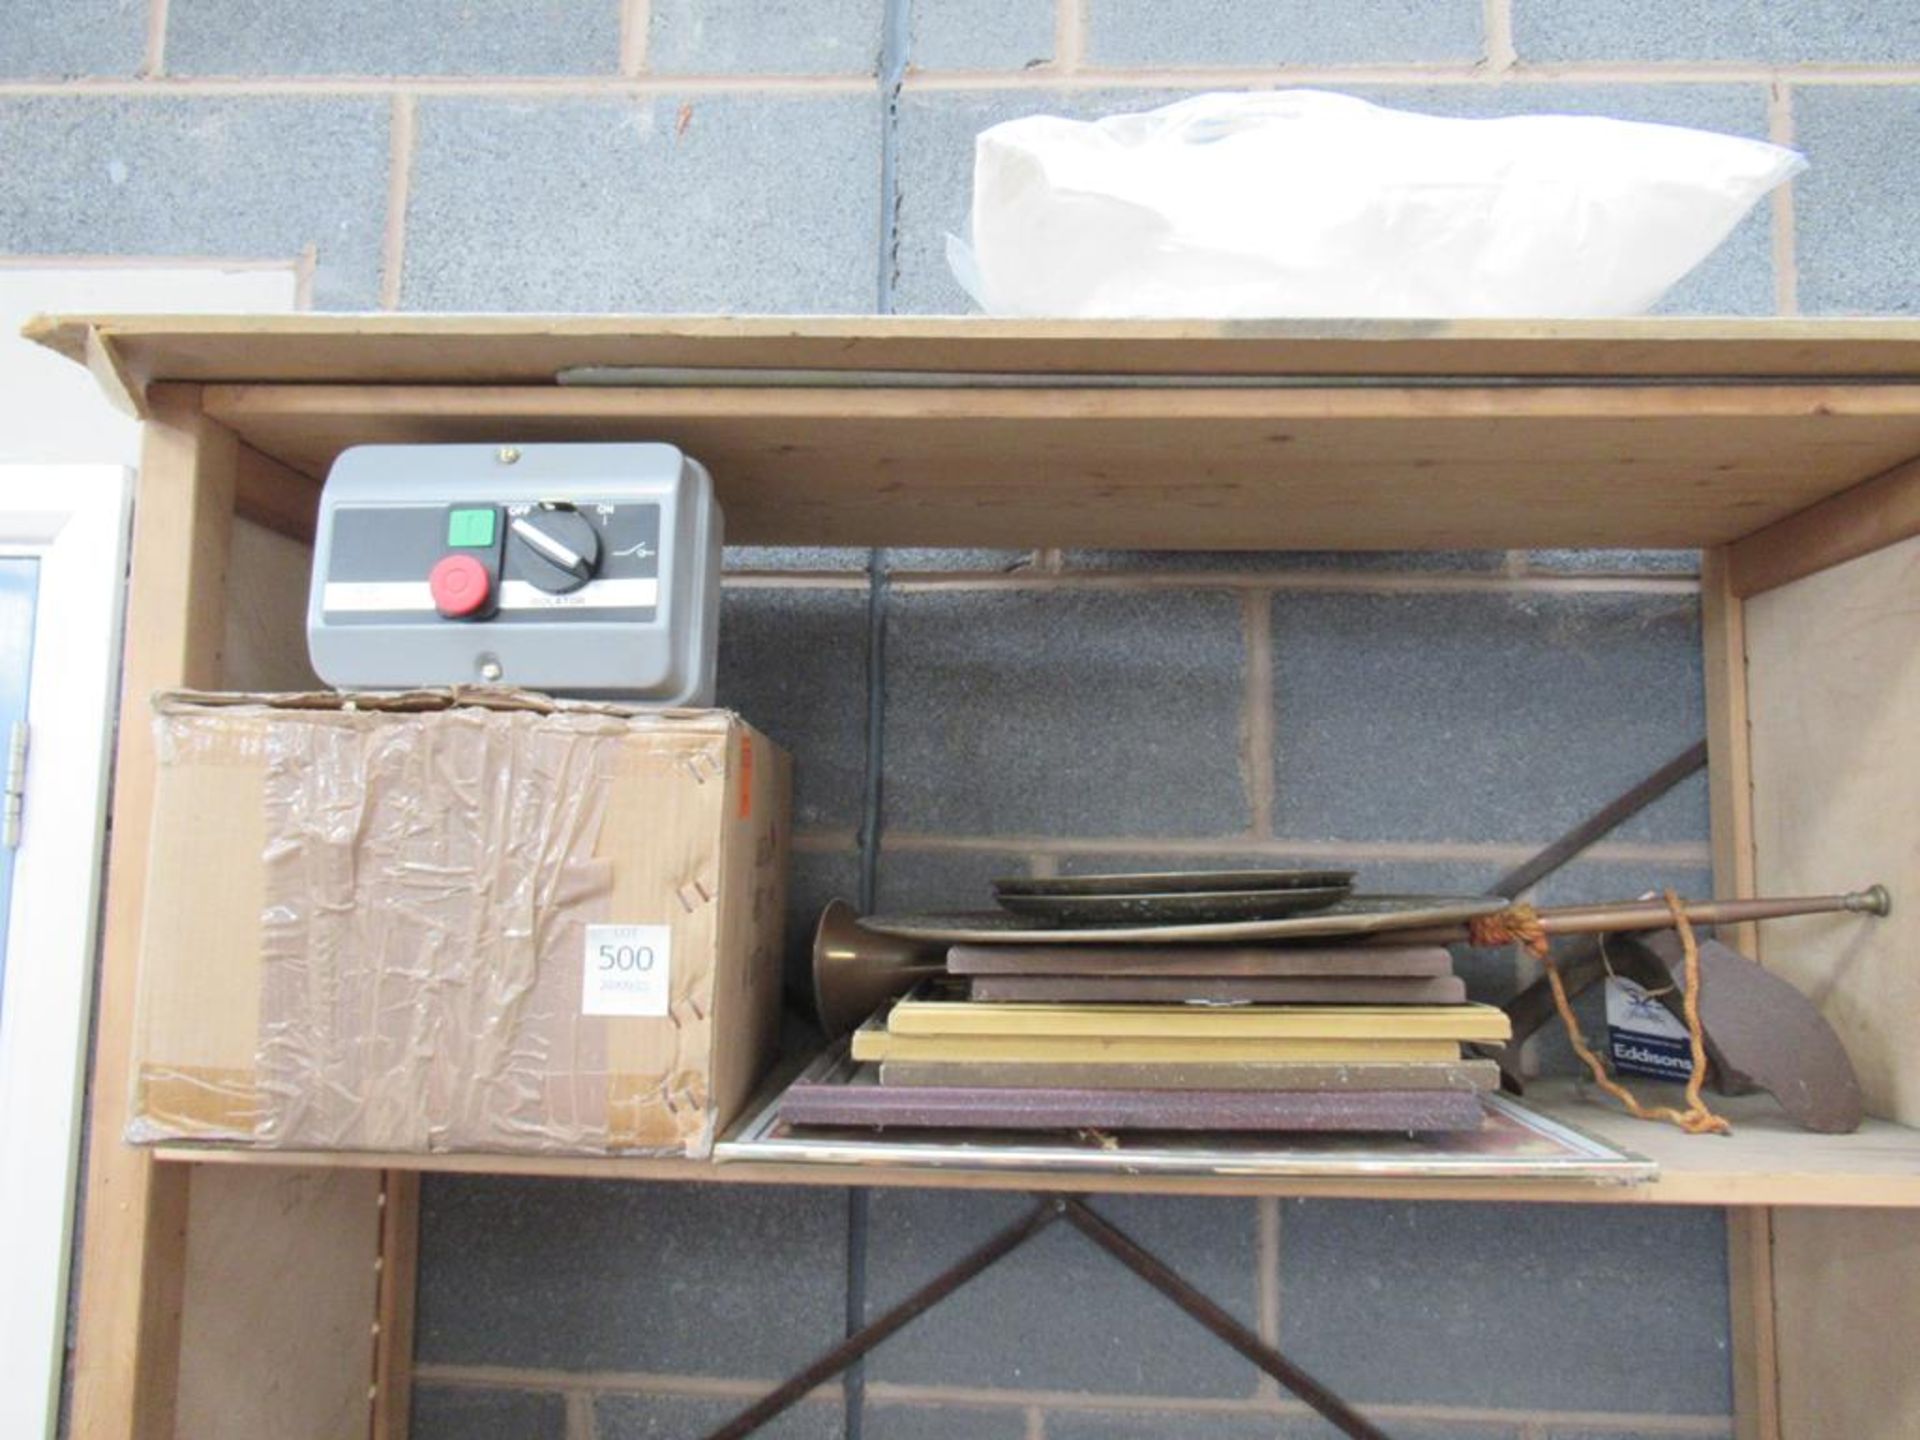 A control box, pictures, metalware and 2x heaters